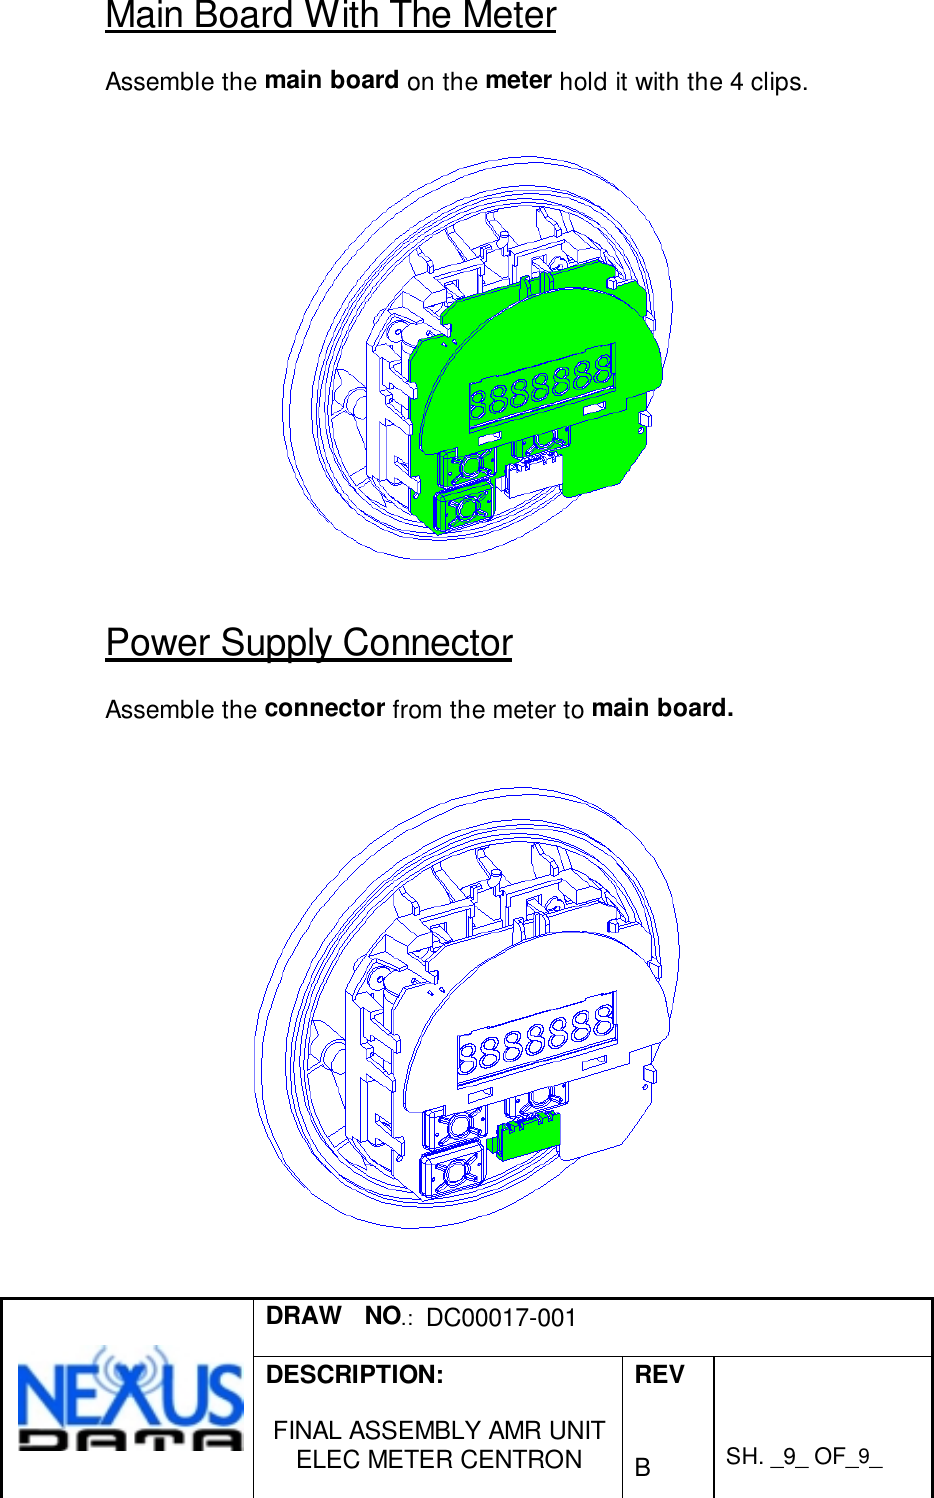 DRAW   NO.:  DC00017-001DESCRIPTION:FINAL ASSEMBLY AMR UNITELEC METER CENTRONREVBSH. _9_ OF_9_Main Board With The MeterAssemble the main board on the meter hold it with the 4 clips.Power Supply ConnectorAssemble the connector from the meter to main board.